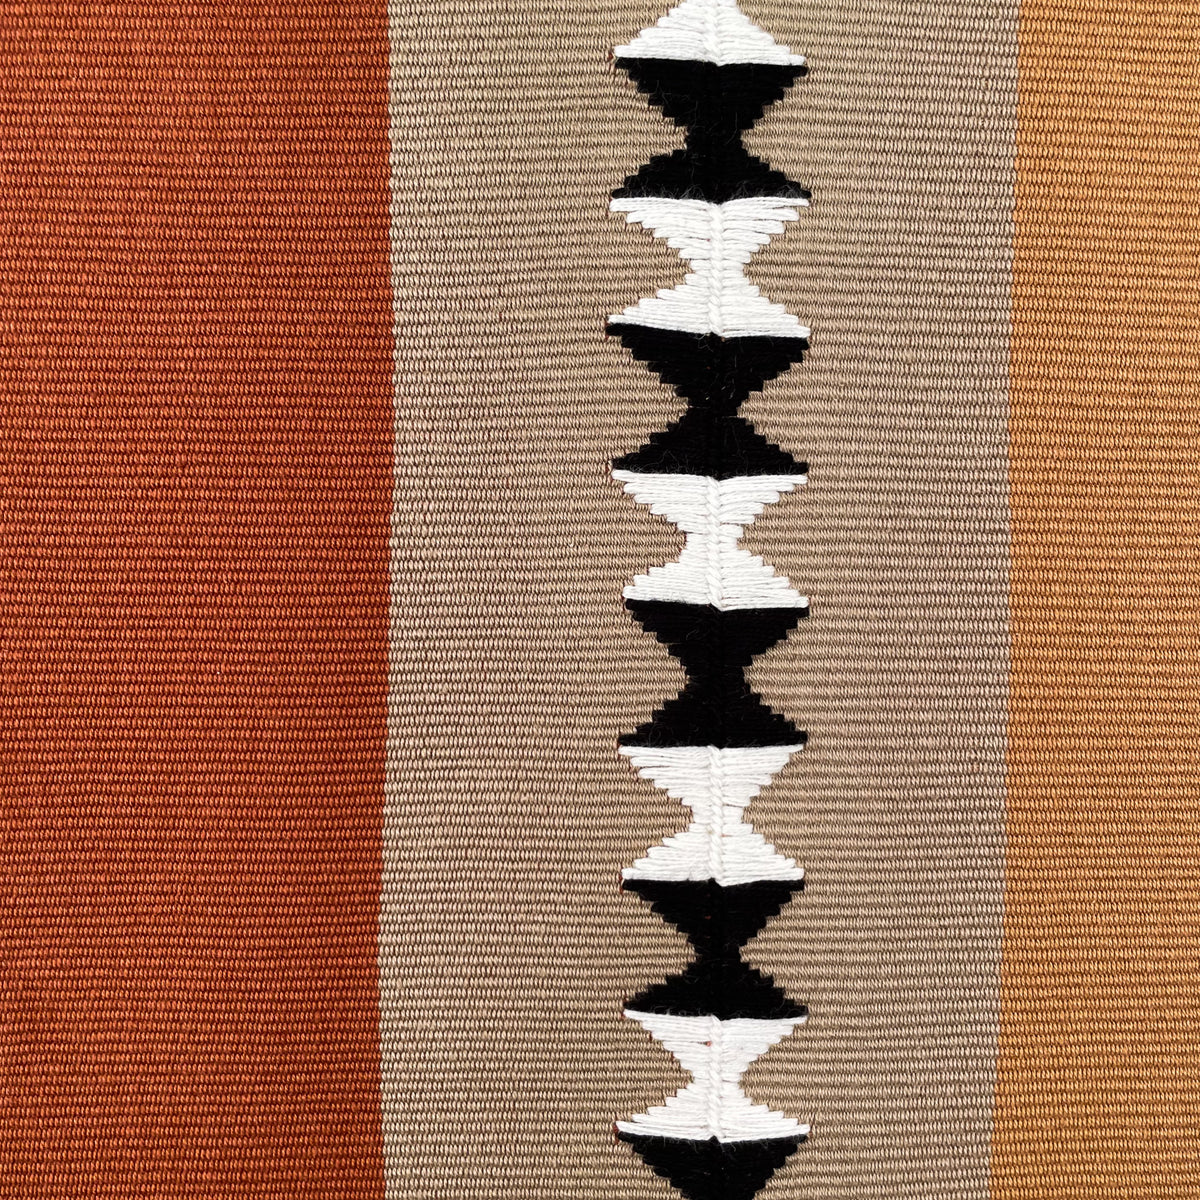 Closeup swatch of cushion panels in color blocks of different shades of brown, with black and white randa detail on center panel